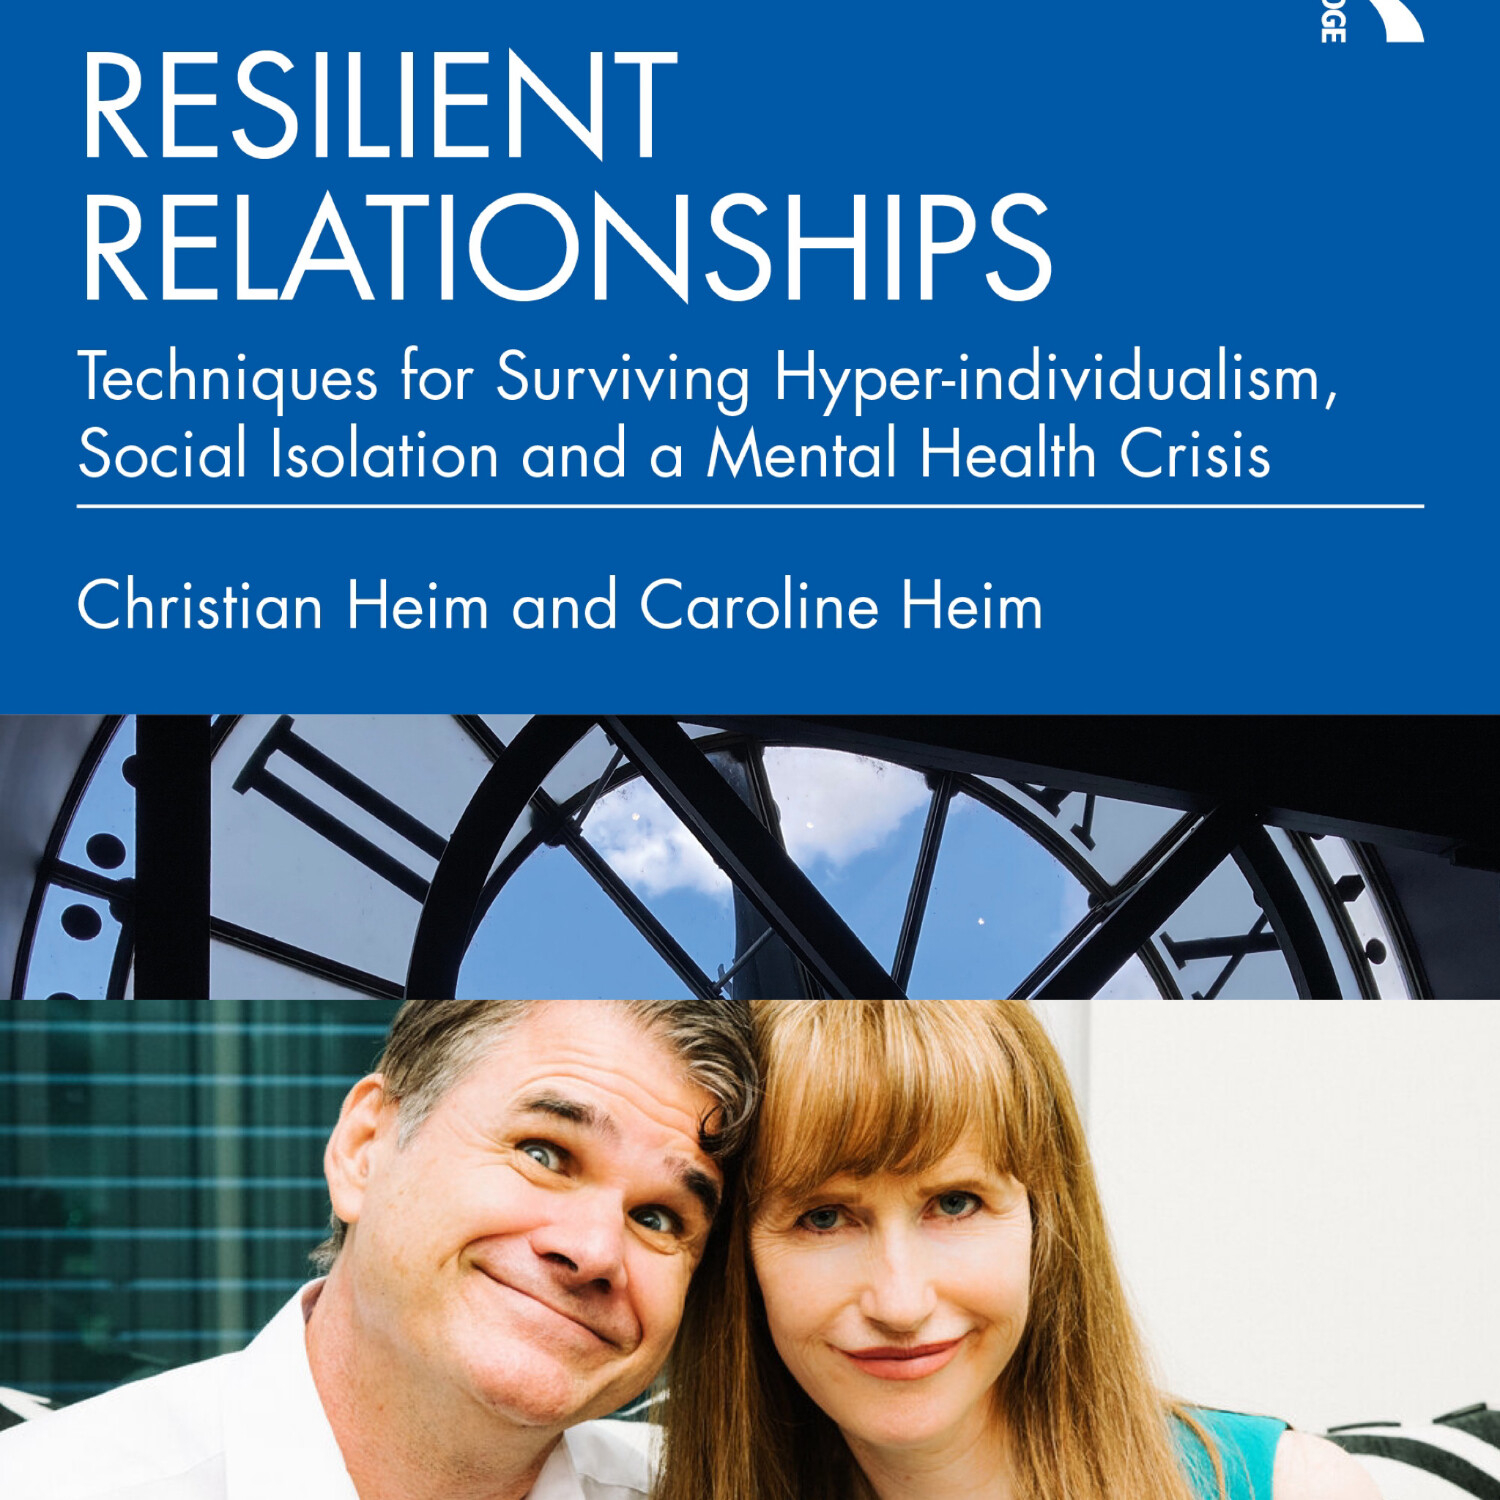 RESILIENT RELATIONSHIPS THE TALKSHOW EP1